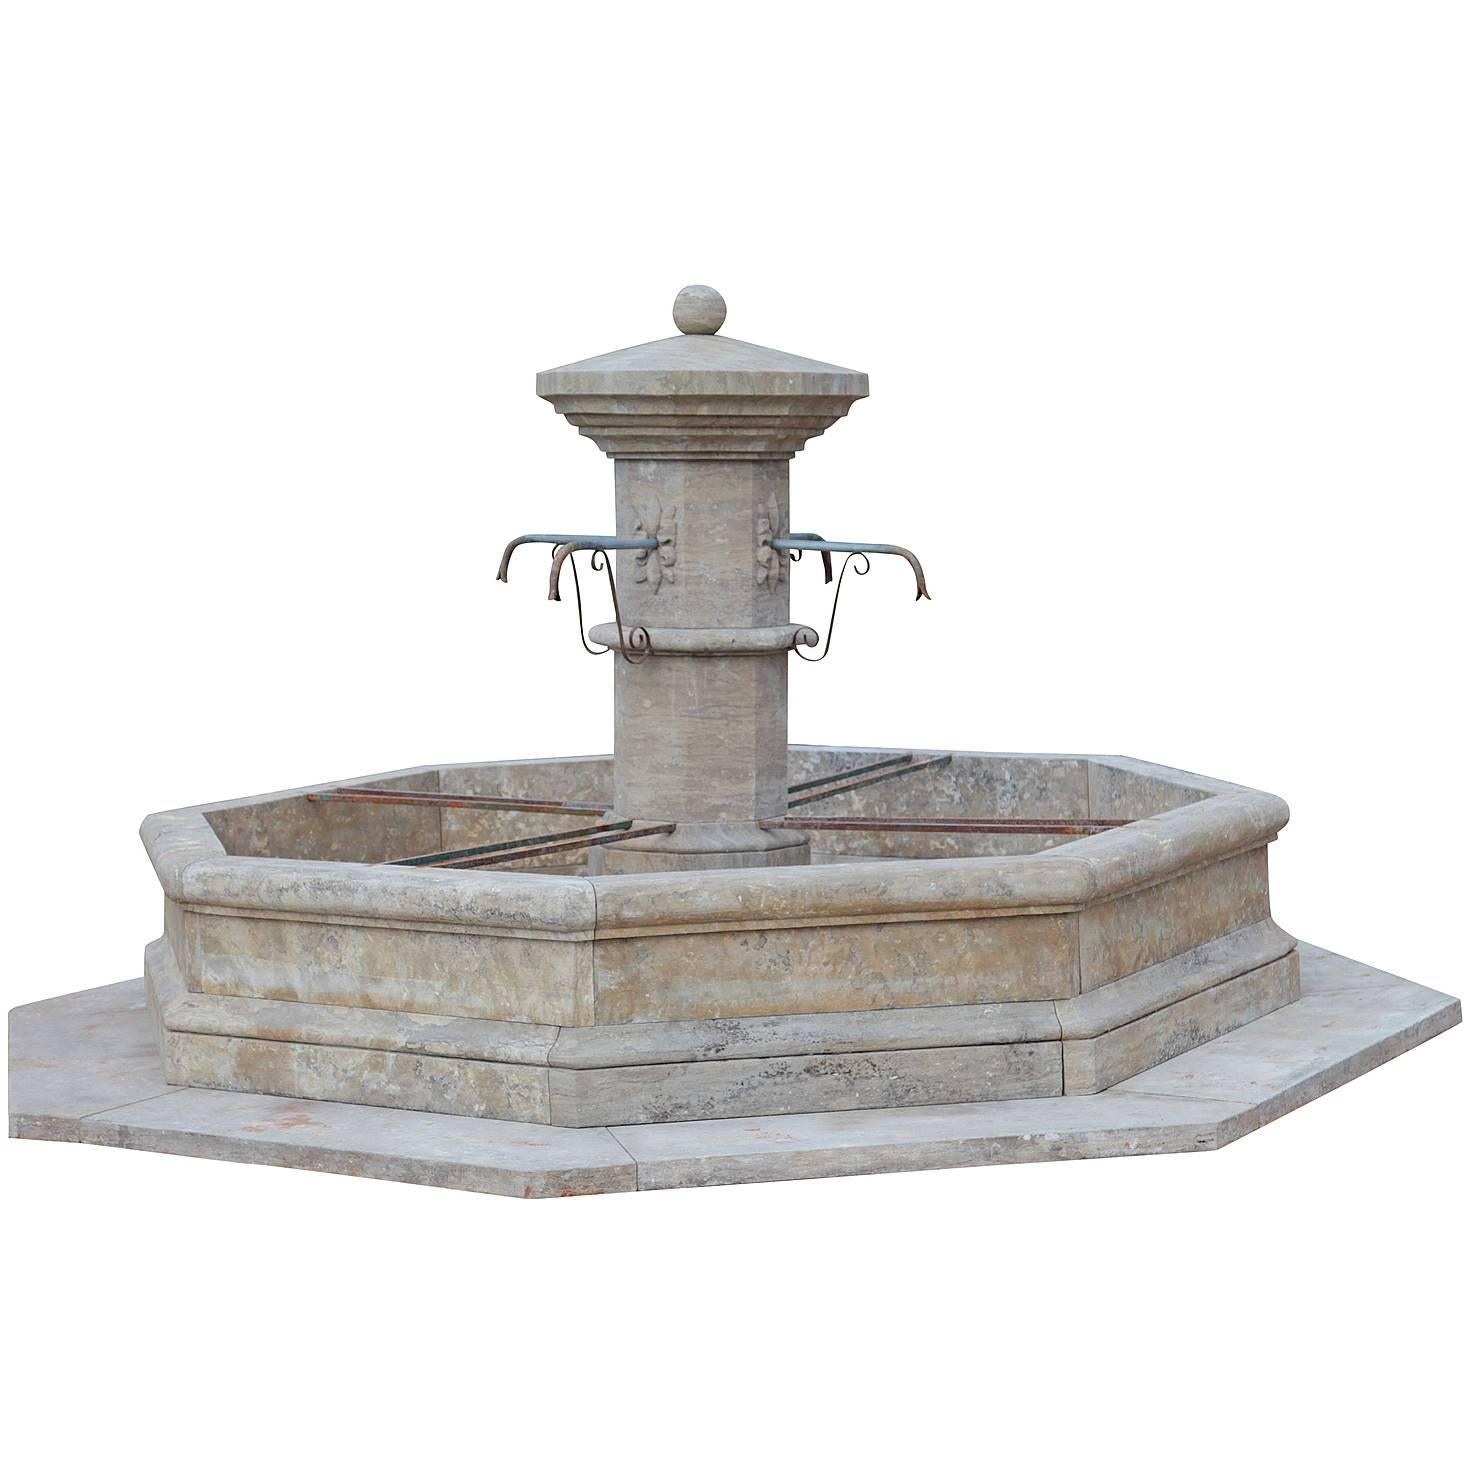 Fountain in Baroque Style